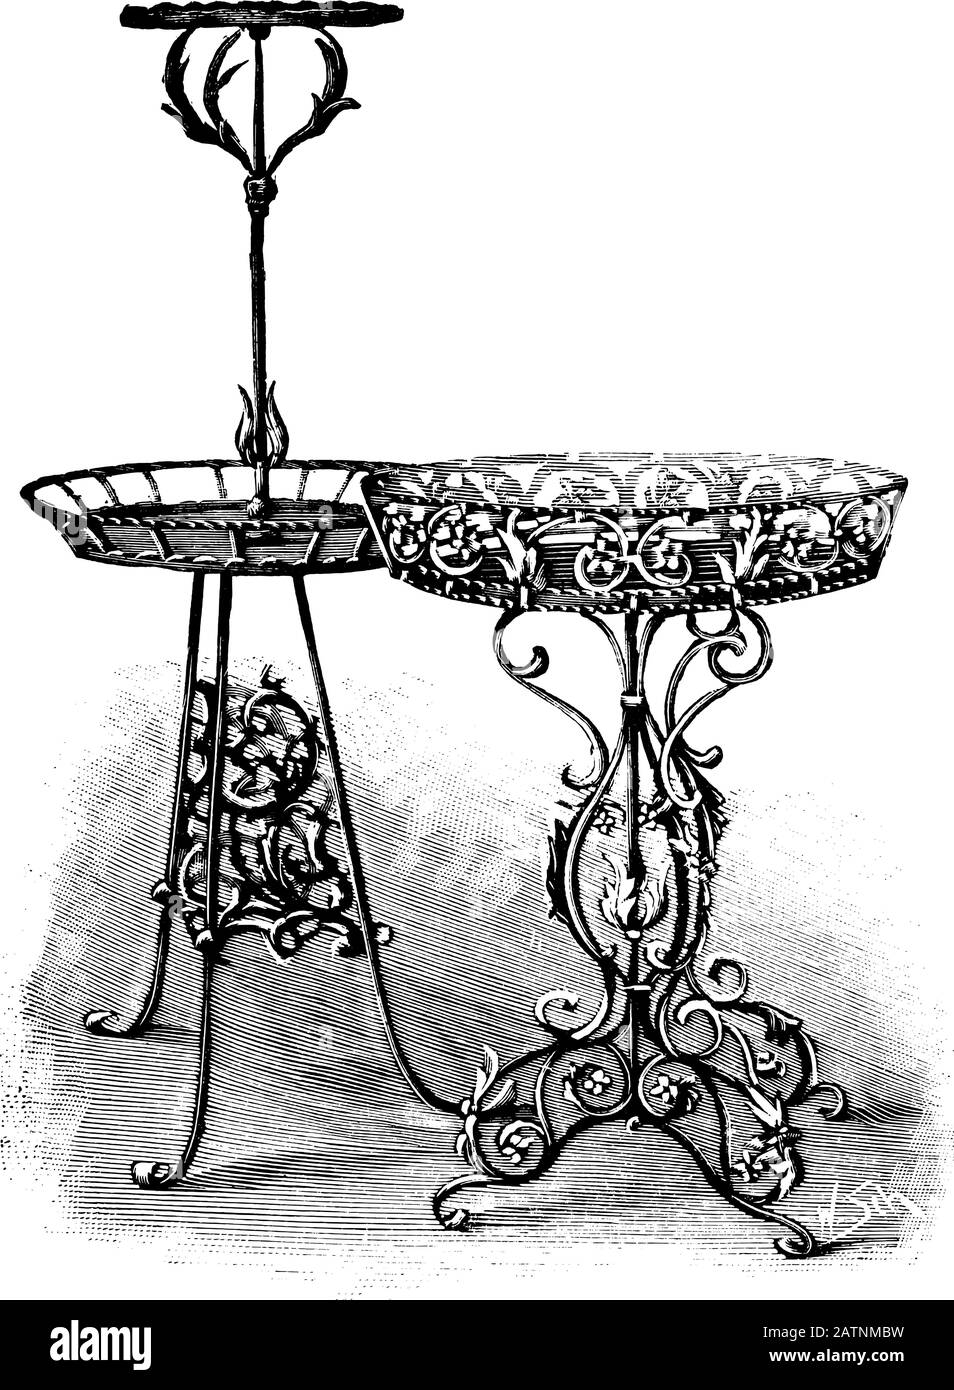 Antique vintage line art illustration, engraving or drawing of ornamental beautiful cast iron plant stands or tables . From book Plants in Room, Prague, 1898. Stock Vector